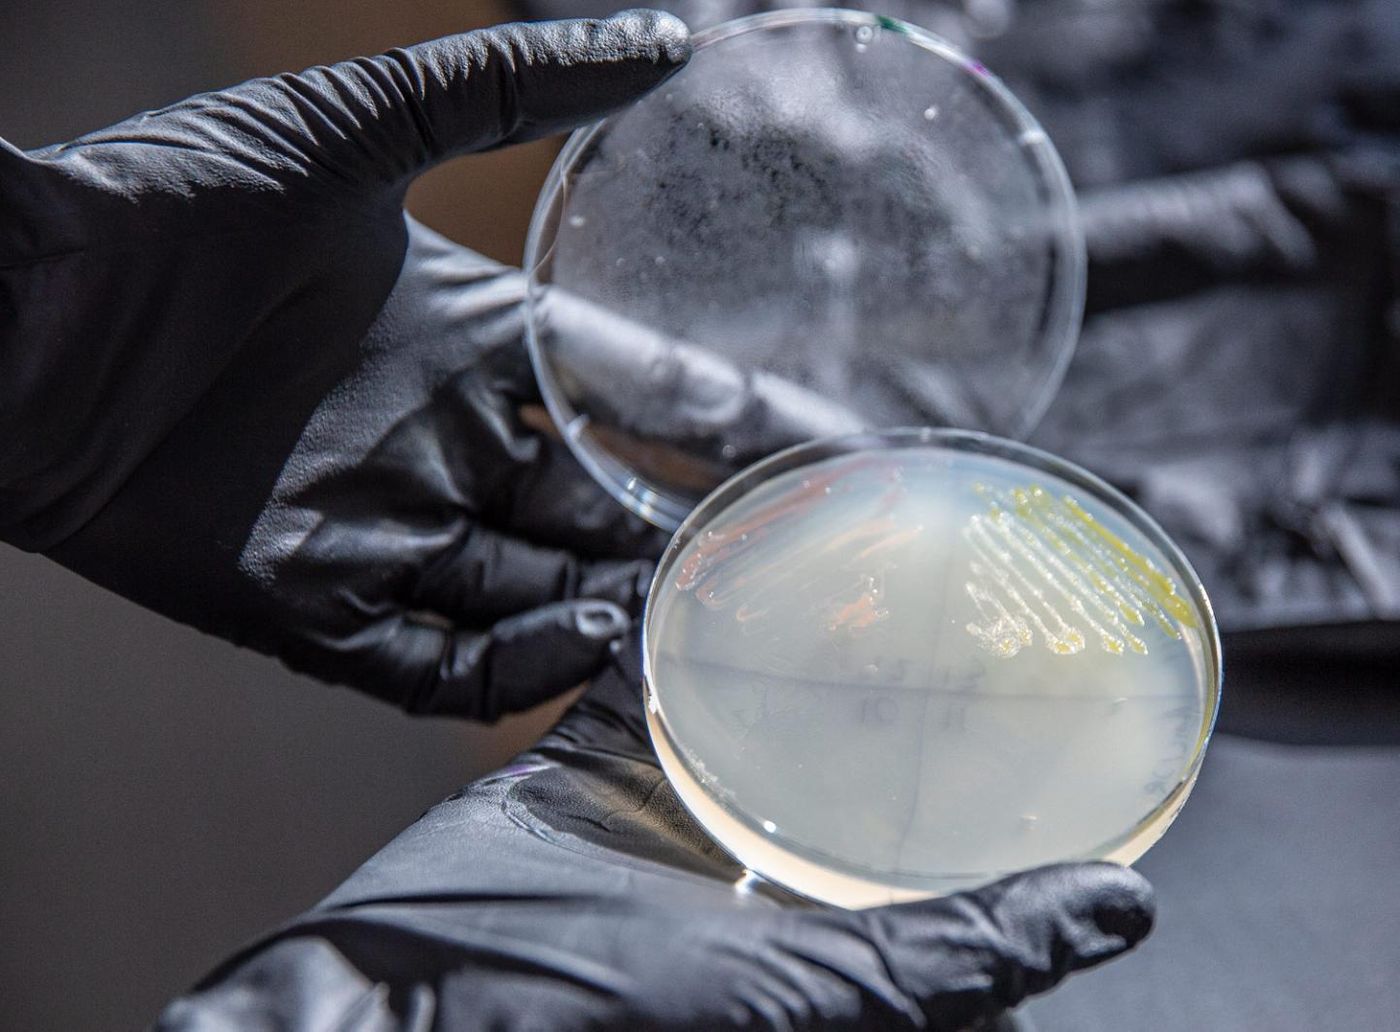 Dr. Alex Linz examines a plate streaked with N. aromaticivorans (in yellow), a soil bacterium that could turn a renewable source - lignin from plant cells - into a replacement for petroleum-based plastics. / Credit: Chelsea Mamott, GLBRC